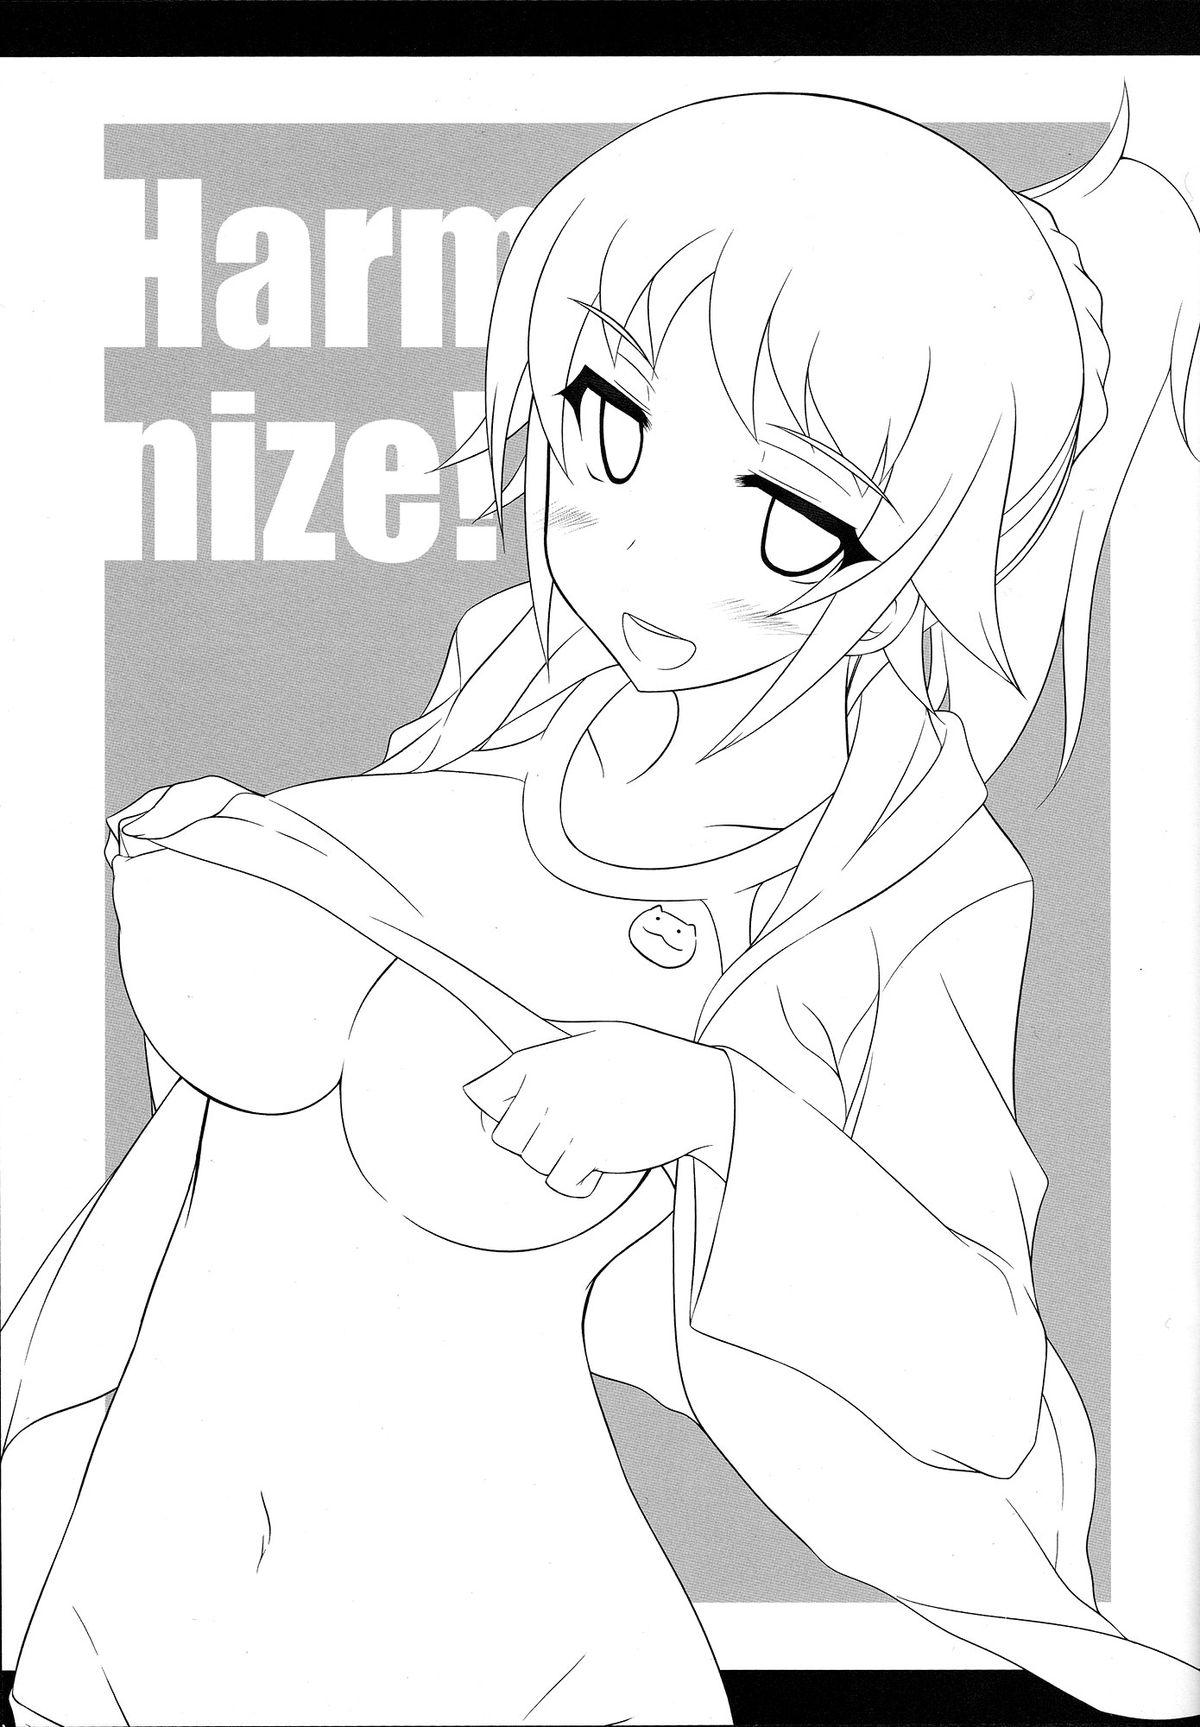 Stretch Harmonize! - Gundam build fighters try Perfect Body Porn - Page 2